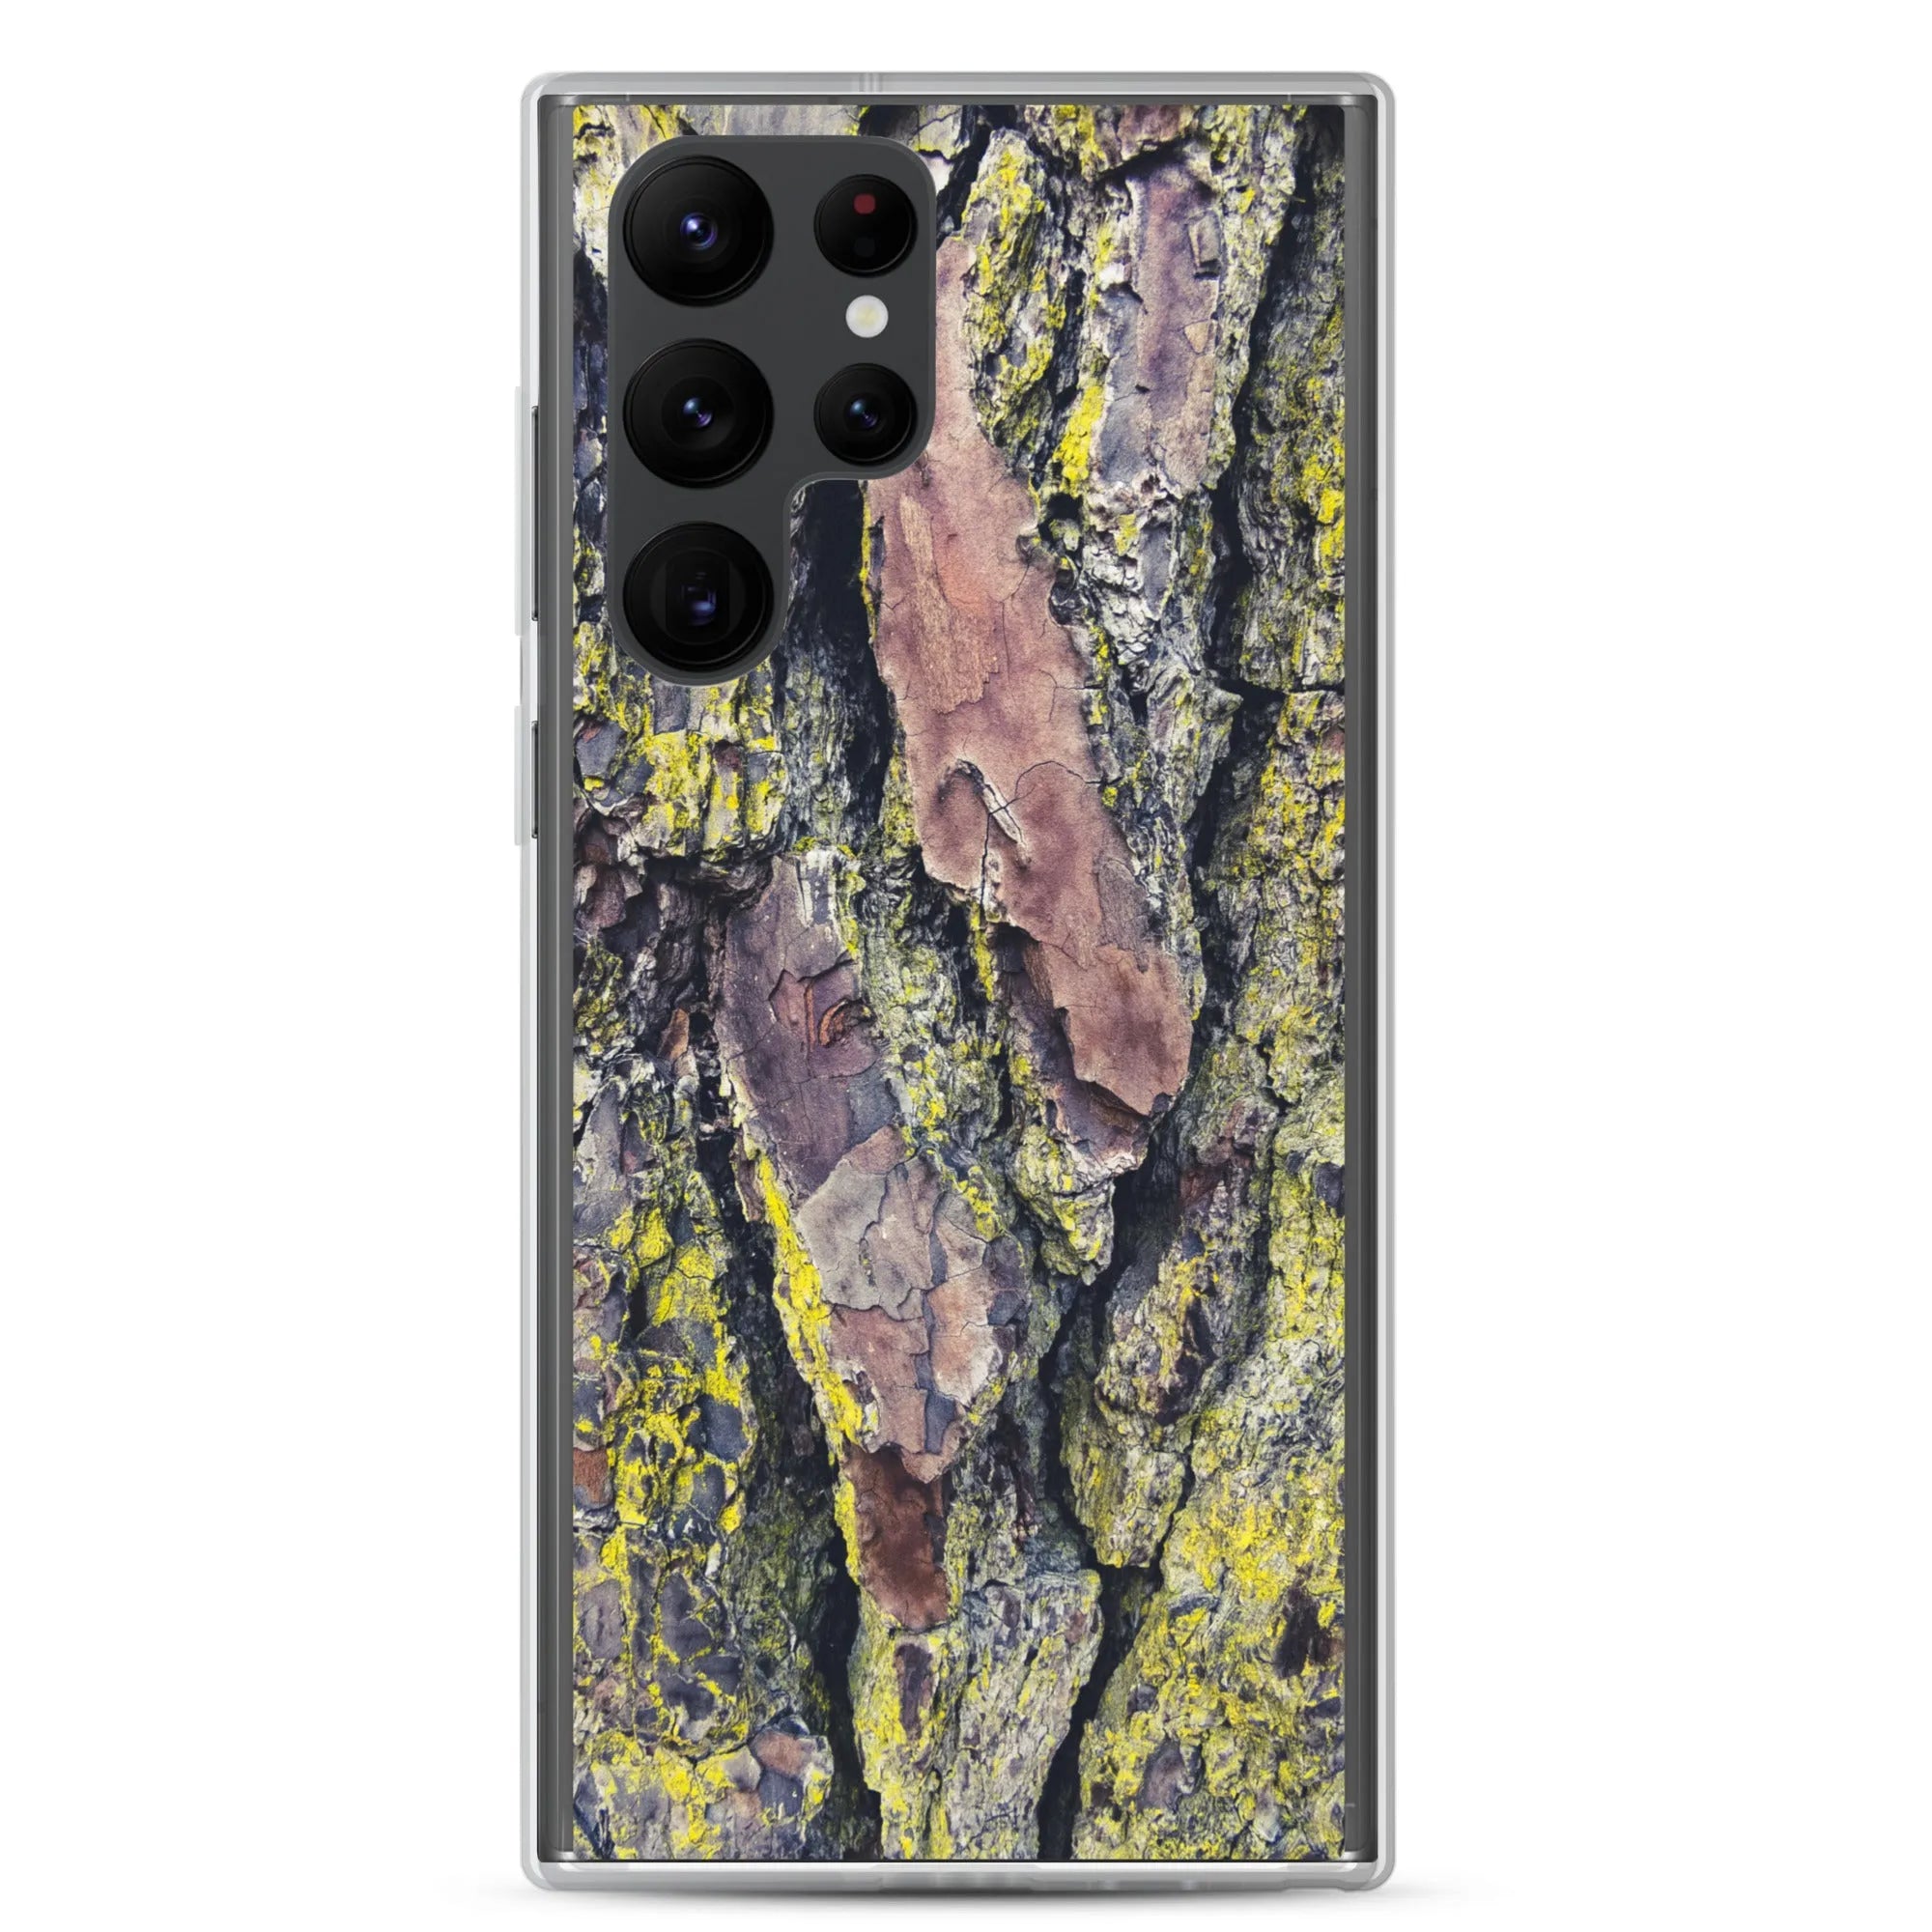 Barking Mad 2 + Too Samsung Galaxy Case - Samsung Galaxy S22 Ultra - Mobile Phone Cases - Aesthetic Art